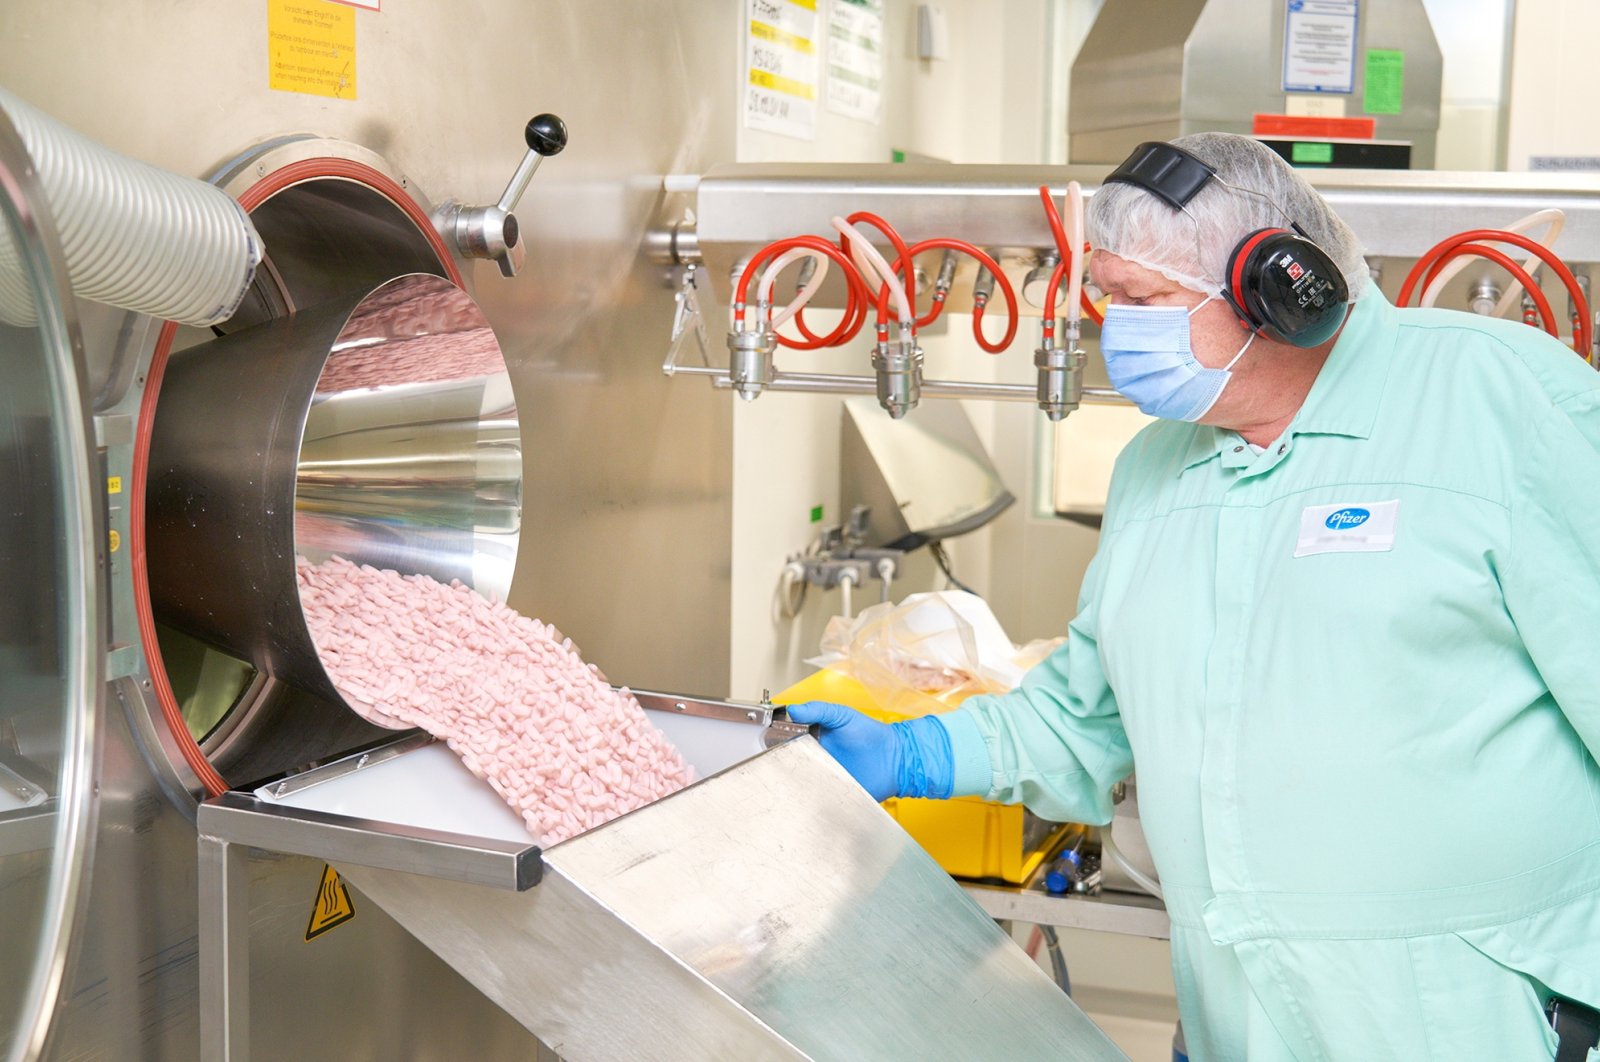 A Pfizer Inc. employee shows Paxlovid, a COVID-19 pill, being manufactured in Freiburg, Germany, Dec. 15, 2021. (EPA - Pfizer Handout)